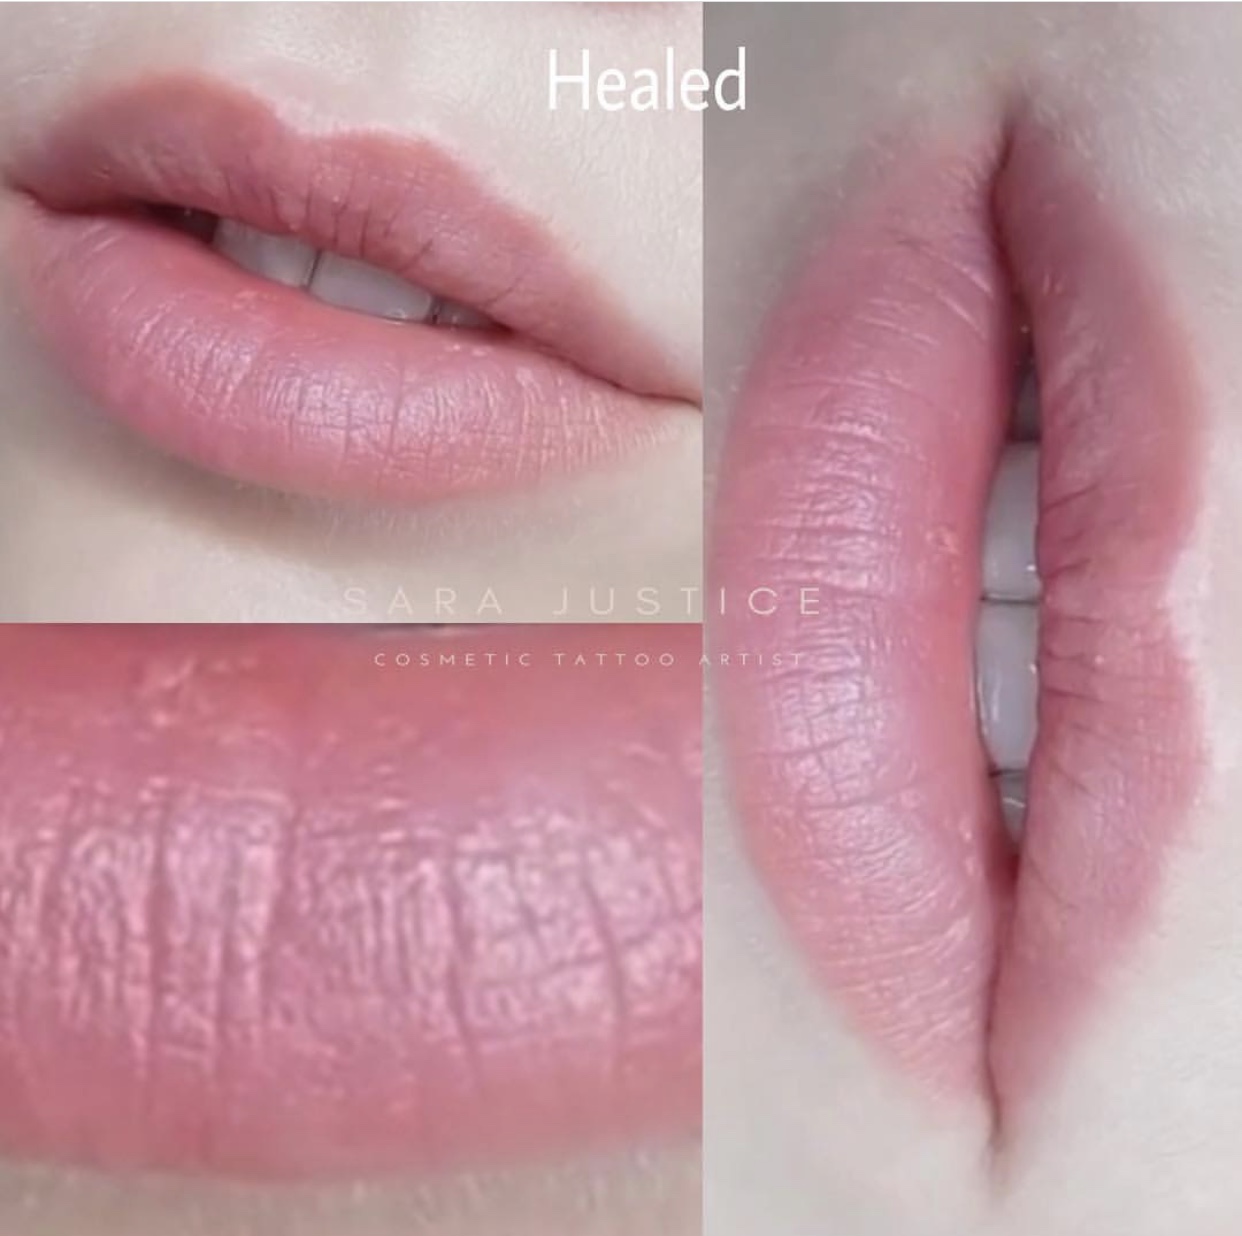 Lip Blushing/Treatment - Arts of Attraction